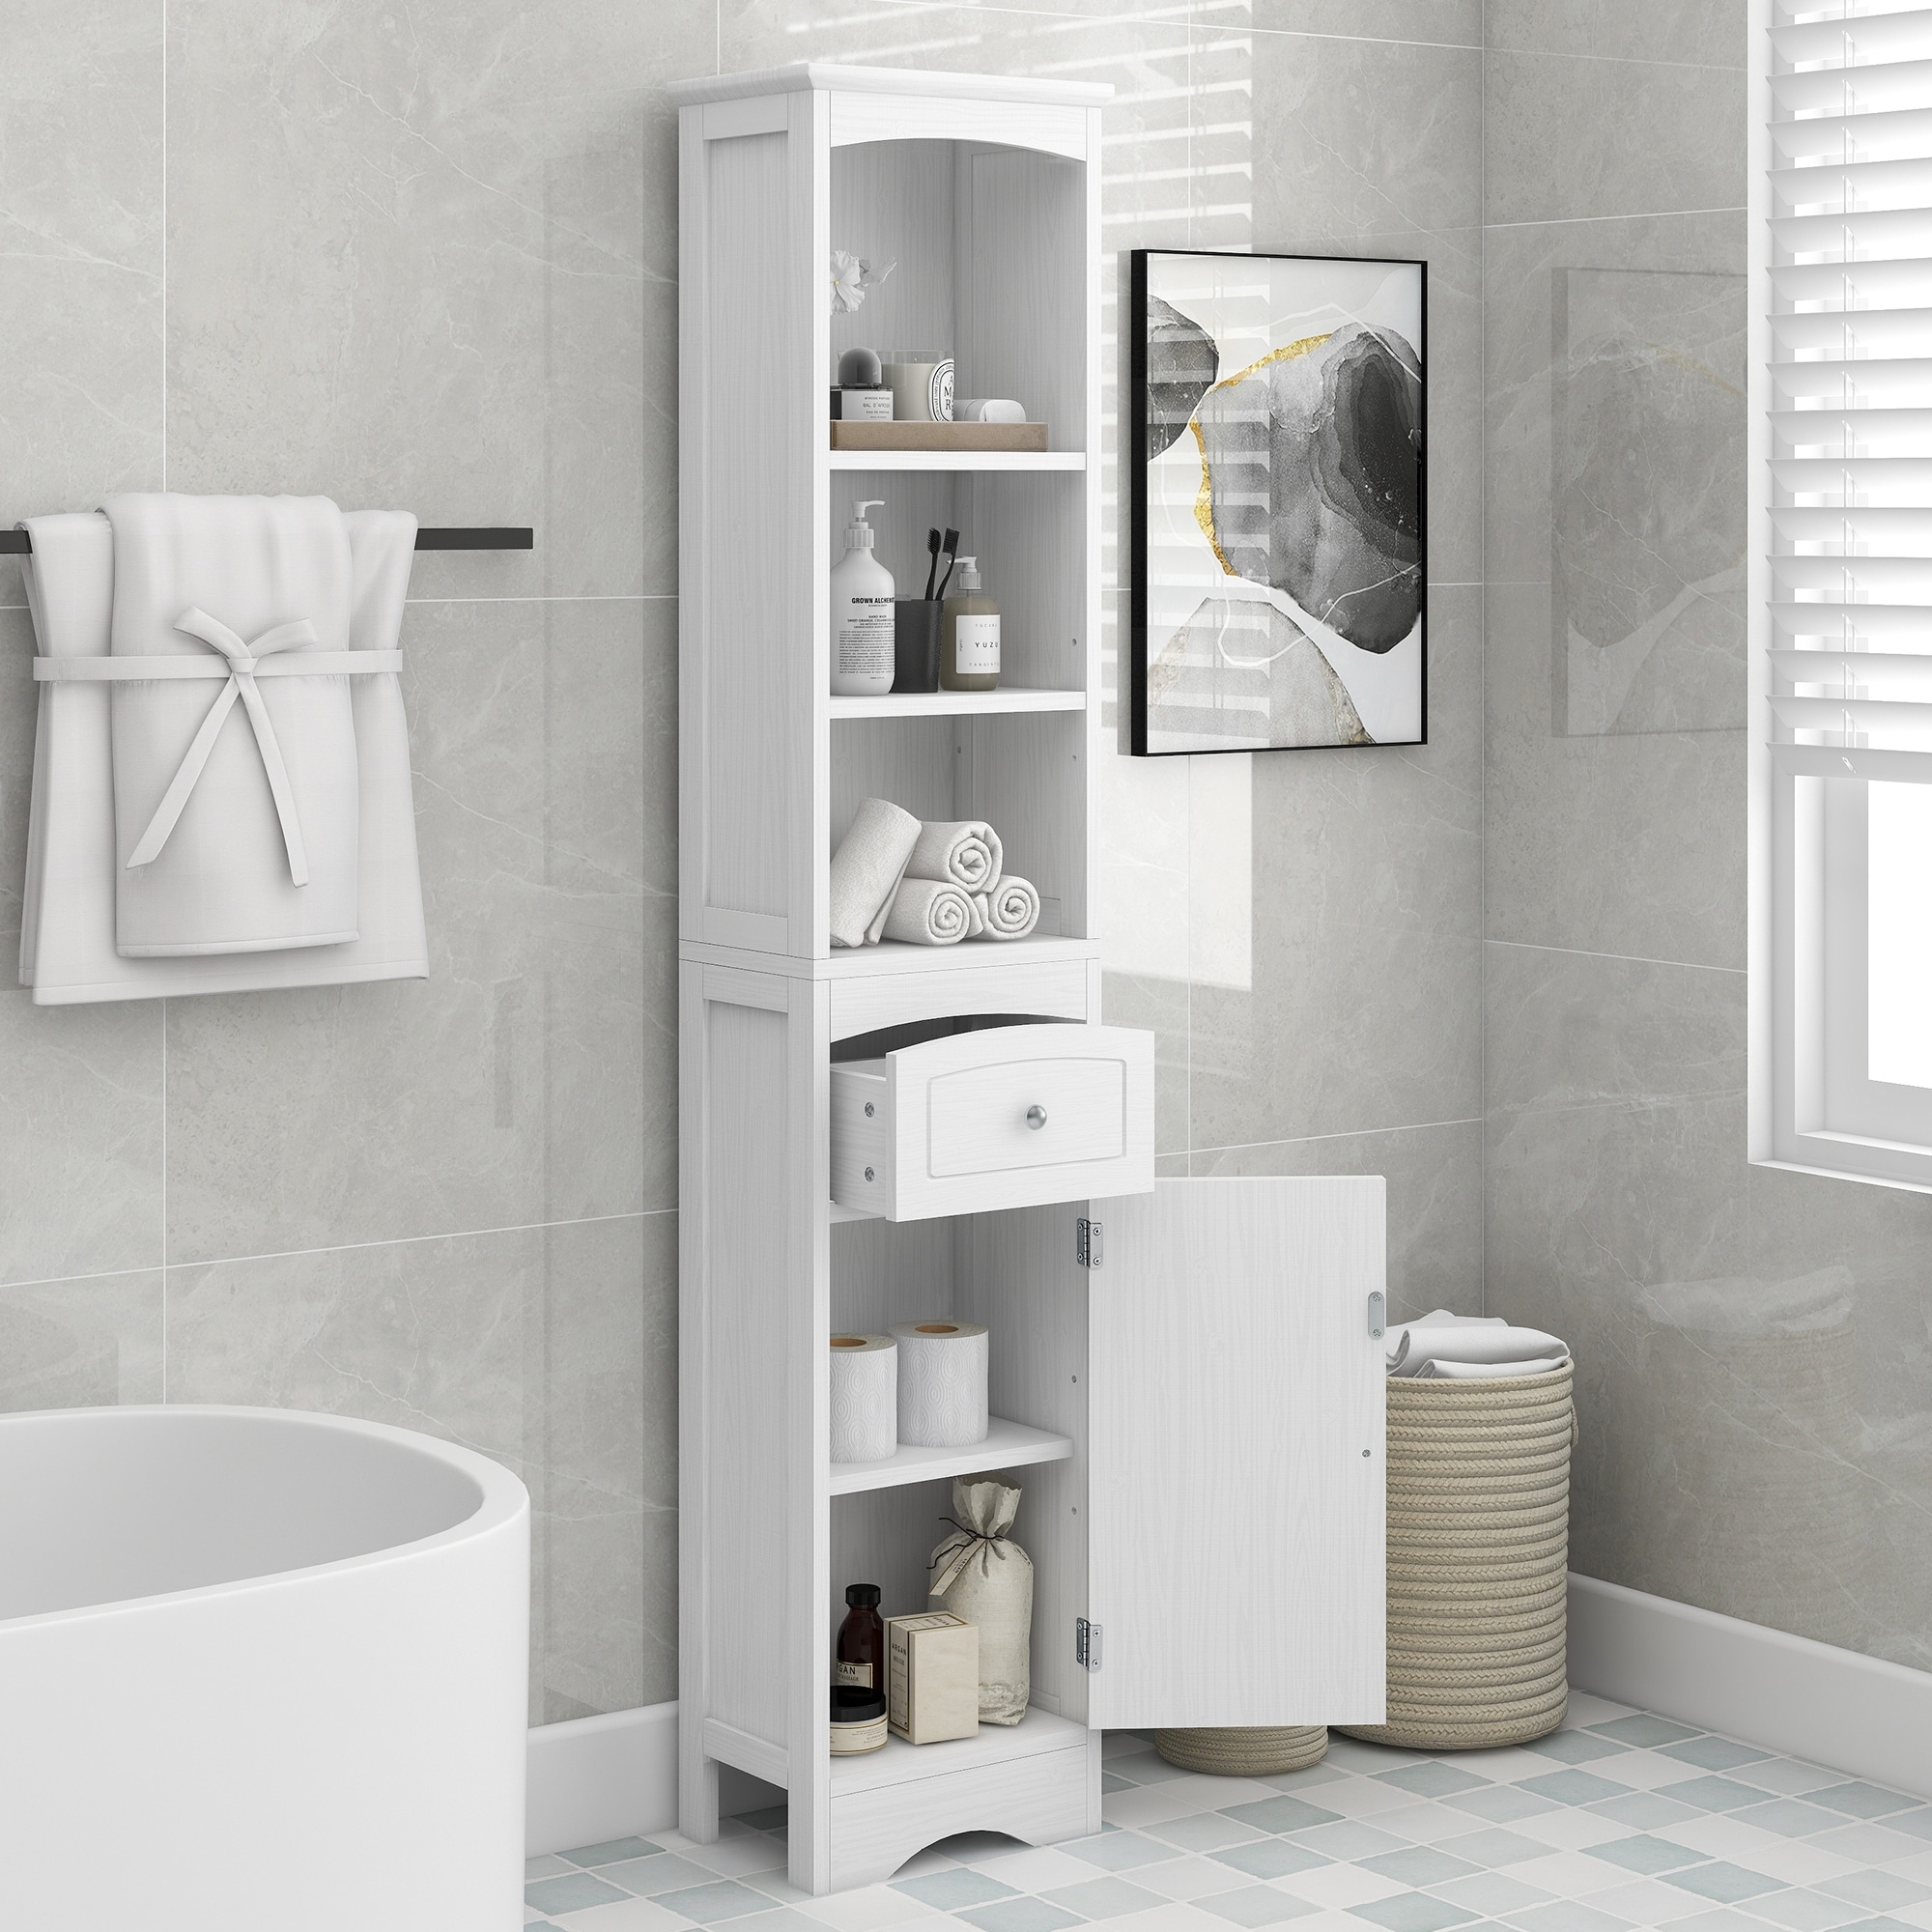 https://ak1.ostkcdn.com/images/products/is/images/direct/9c0a5056d1e1714314f4a916bca8c9276d37cc38/66.9%27%27-Tall-Bathroom-Cabinet-Freestanding-with-Drawer-and-Adjustable-Shelf%2CWhite.jpg